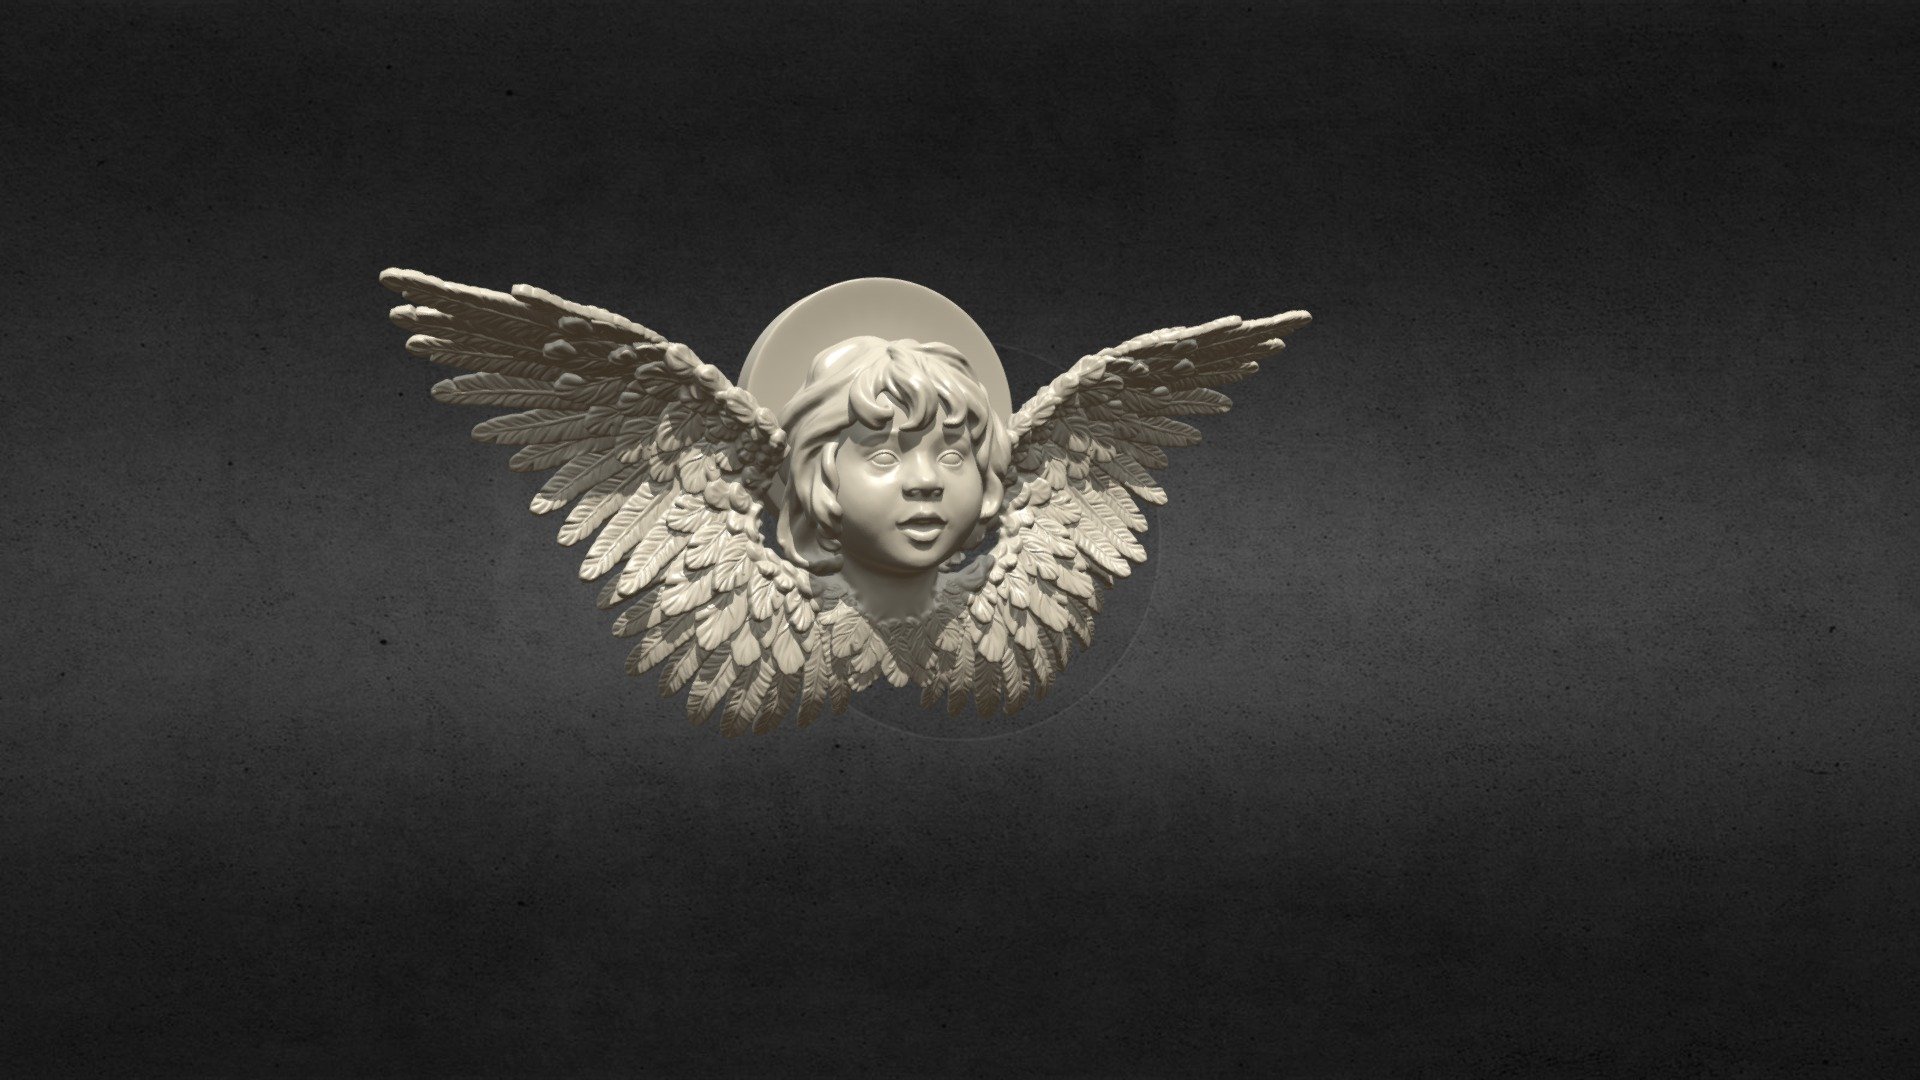 Cherub Angel 3D print model

High poly cherub.

File contains one mesh object. 
Meters was used us measure units. It is about 6 cm in height.

File names contains suffixes _HR for high resolution and _LR for low resolution. For HR files there is 820500 faces and for _LR 63178 faces.

Native format is .blend 3d model